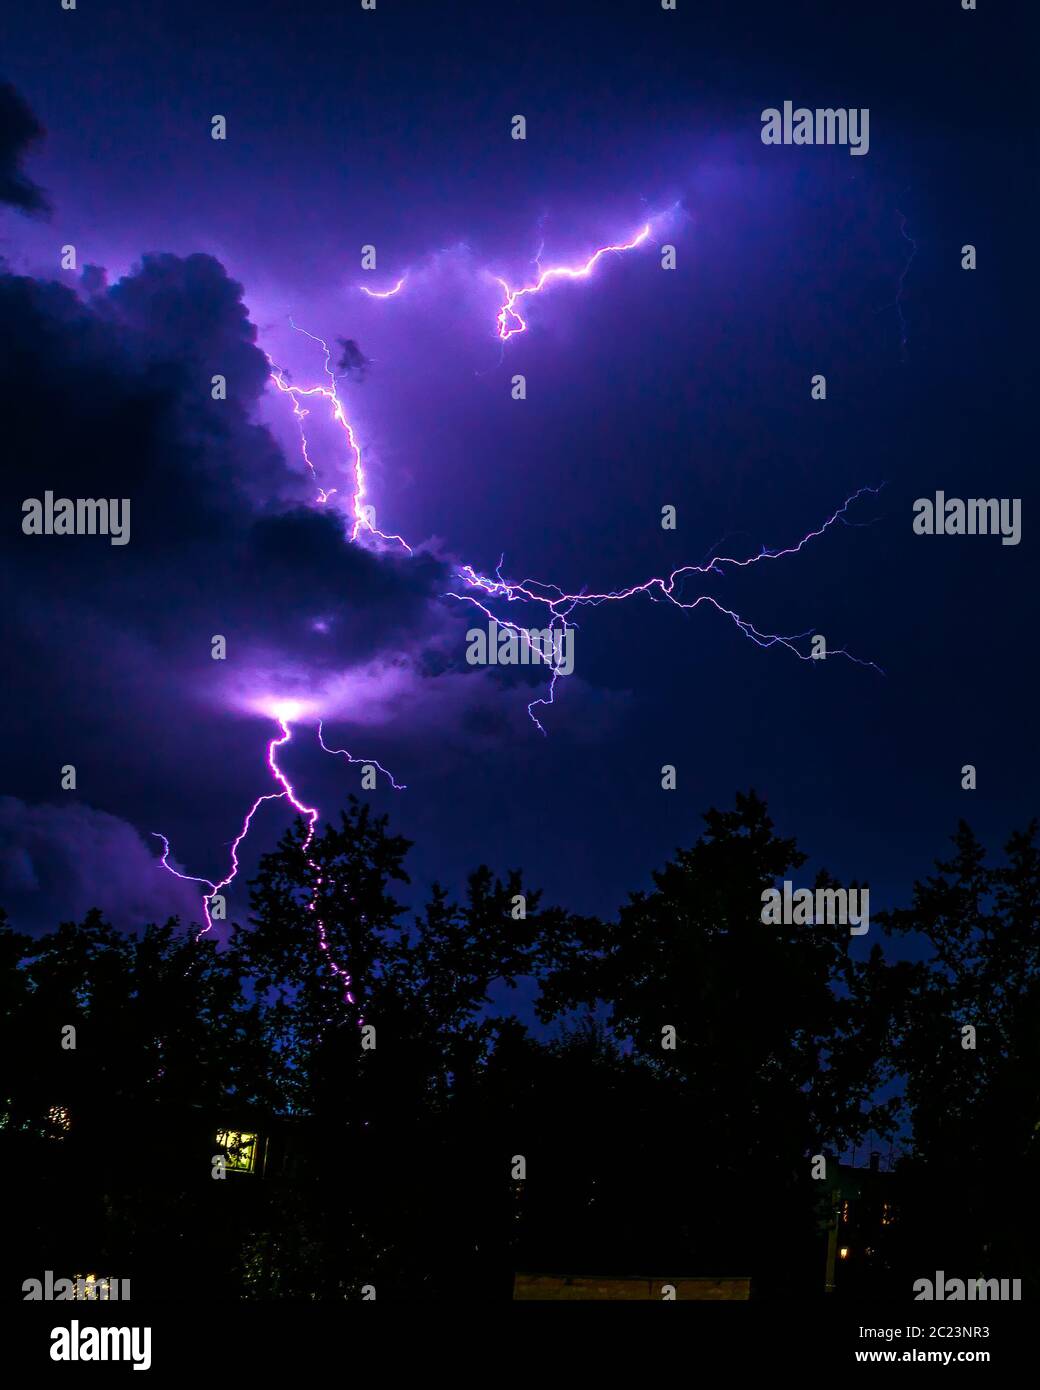 bright flashes of lightning during night thunderstorms, silhouettes of trees and houses against the dark blue sky Stock Photo